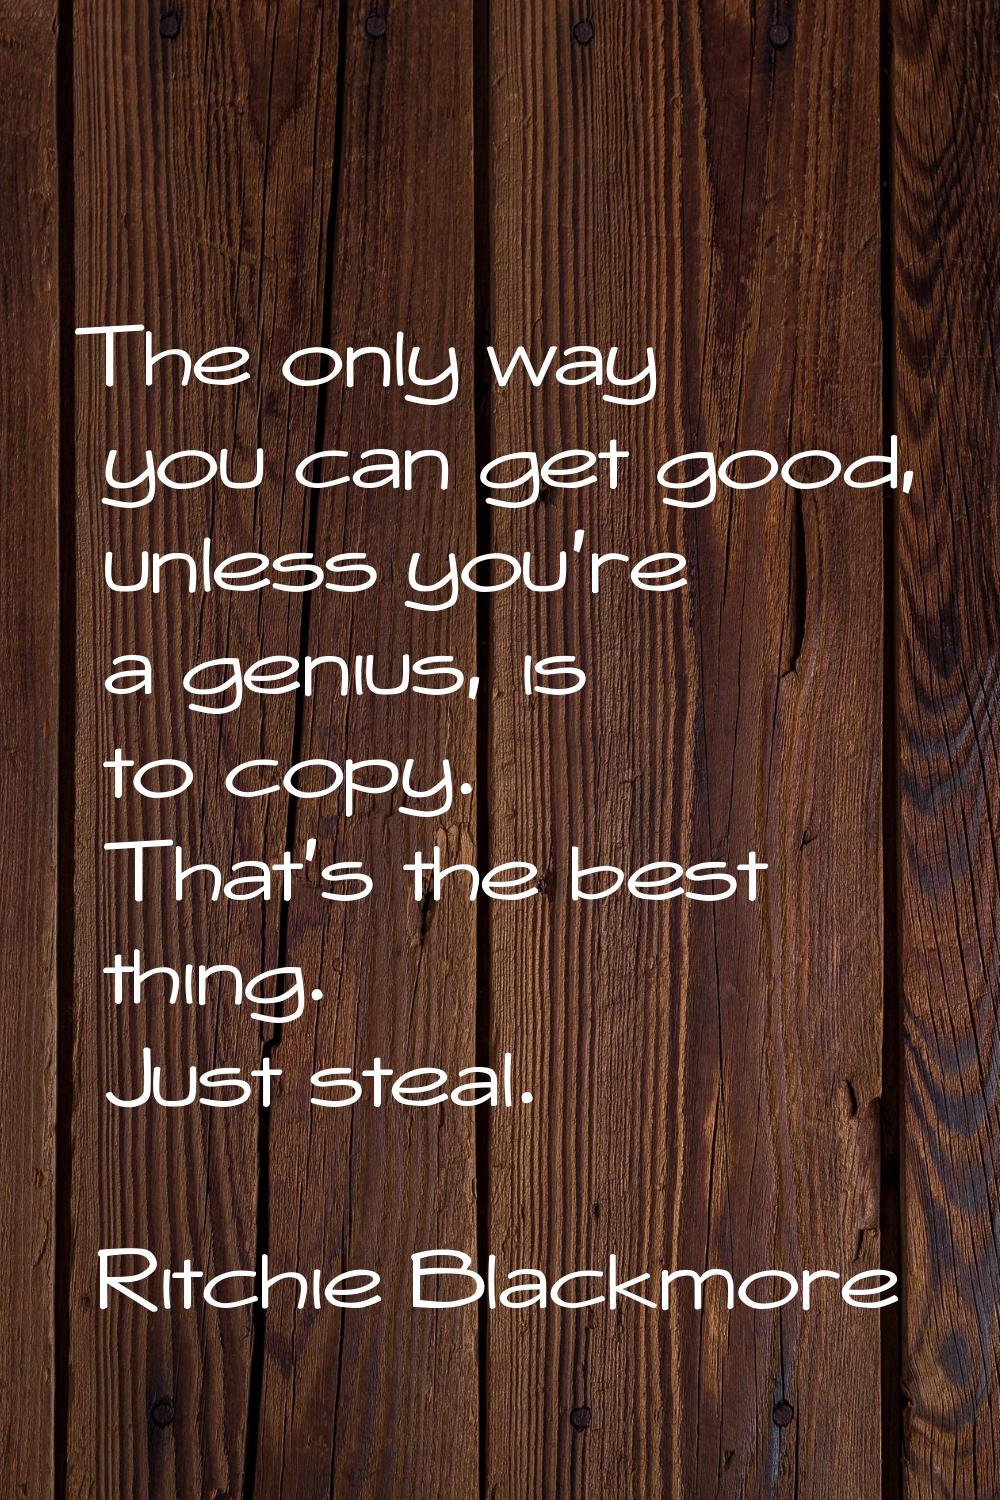 The only way you can get good, unless you're a genius, is to copy. That's the best thing. Just stea